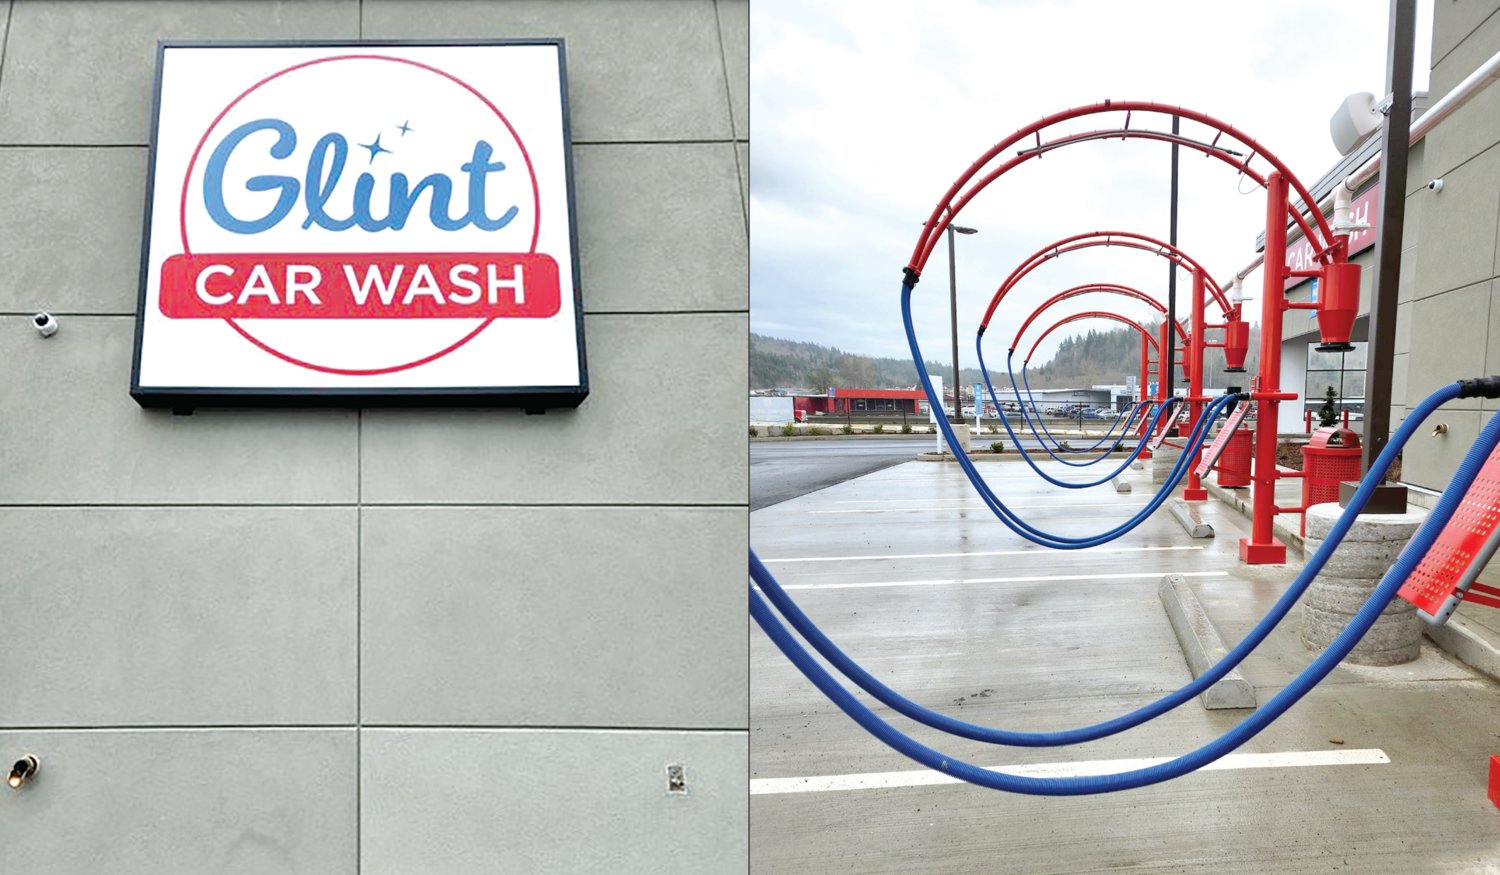 These photos of the new Glint Car Wash in Chehalis were provided by the Centralia-Chehalis Chamber of Commerce.